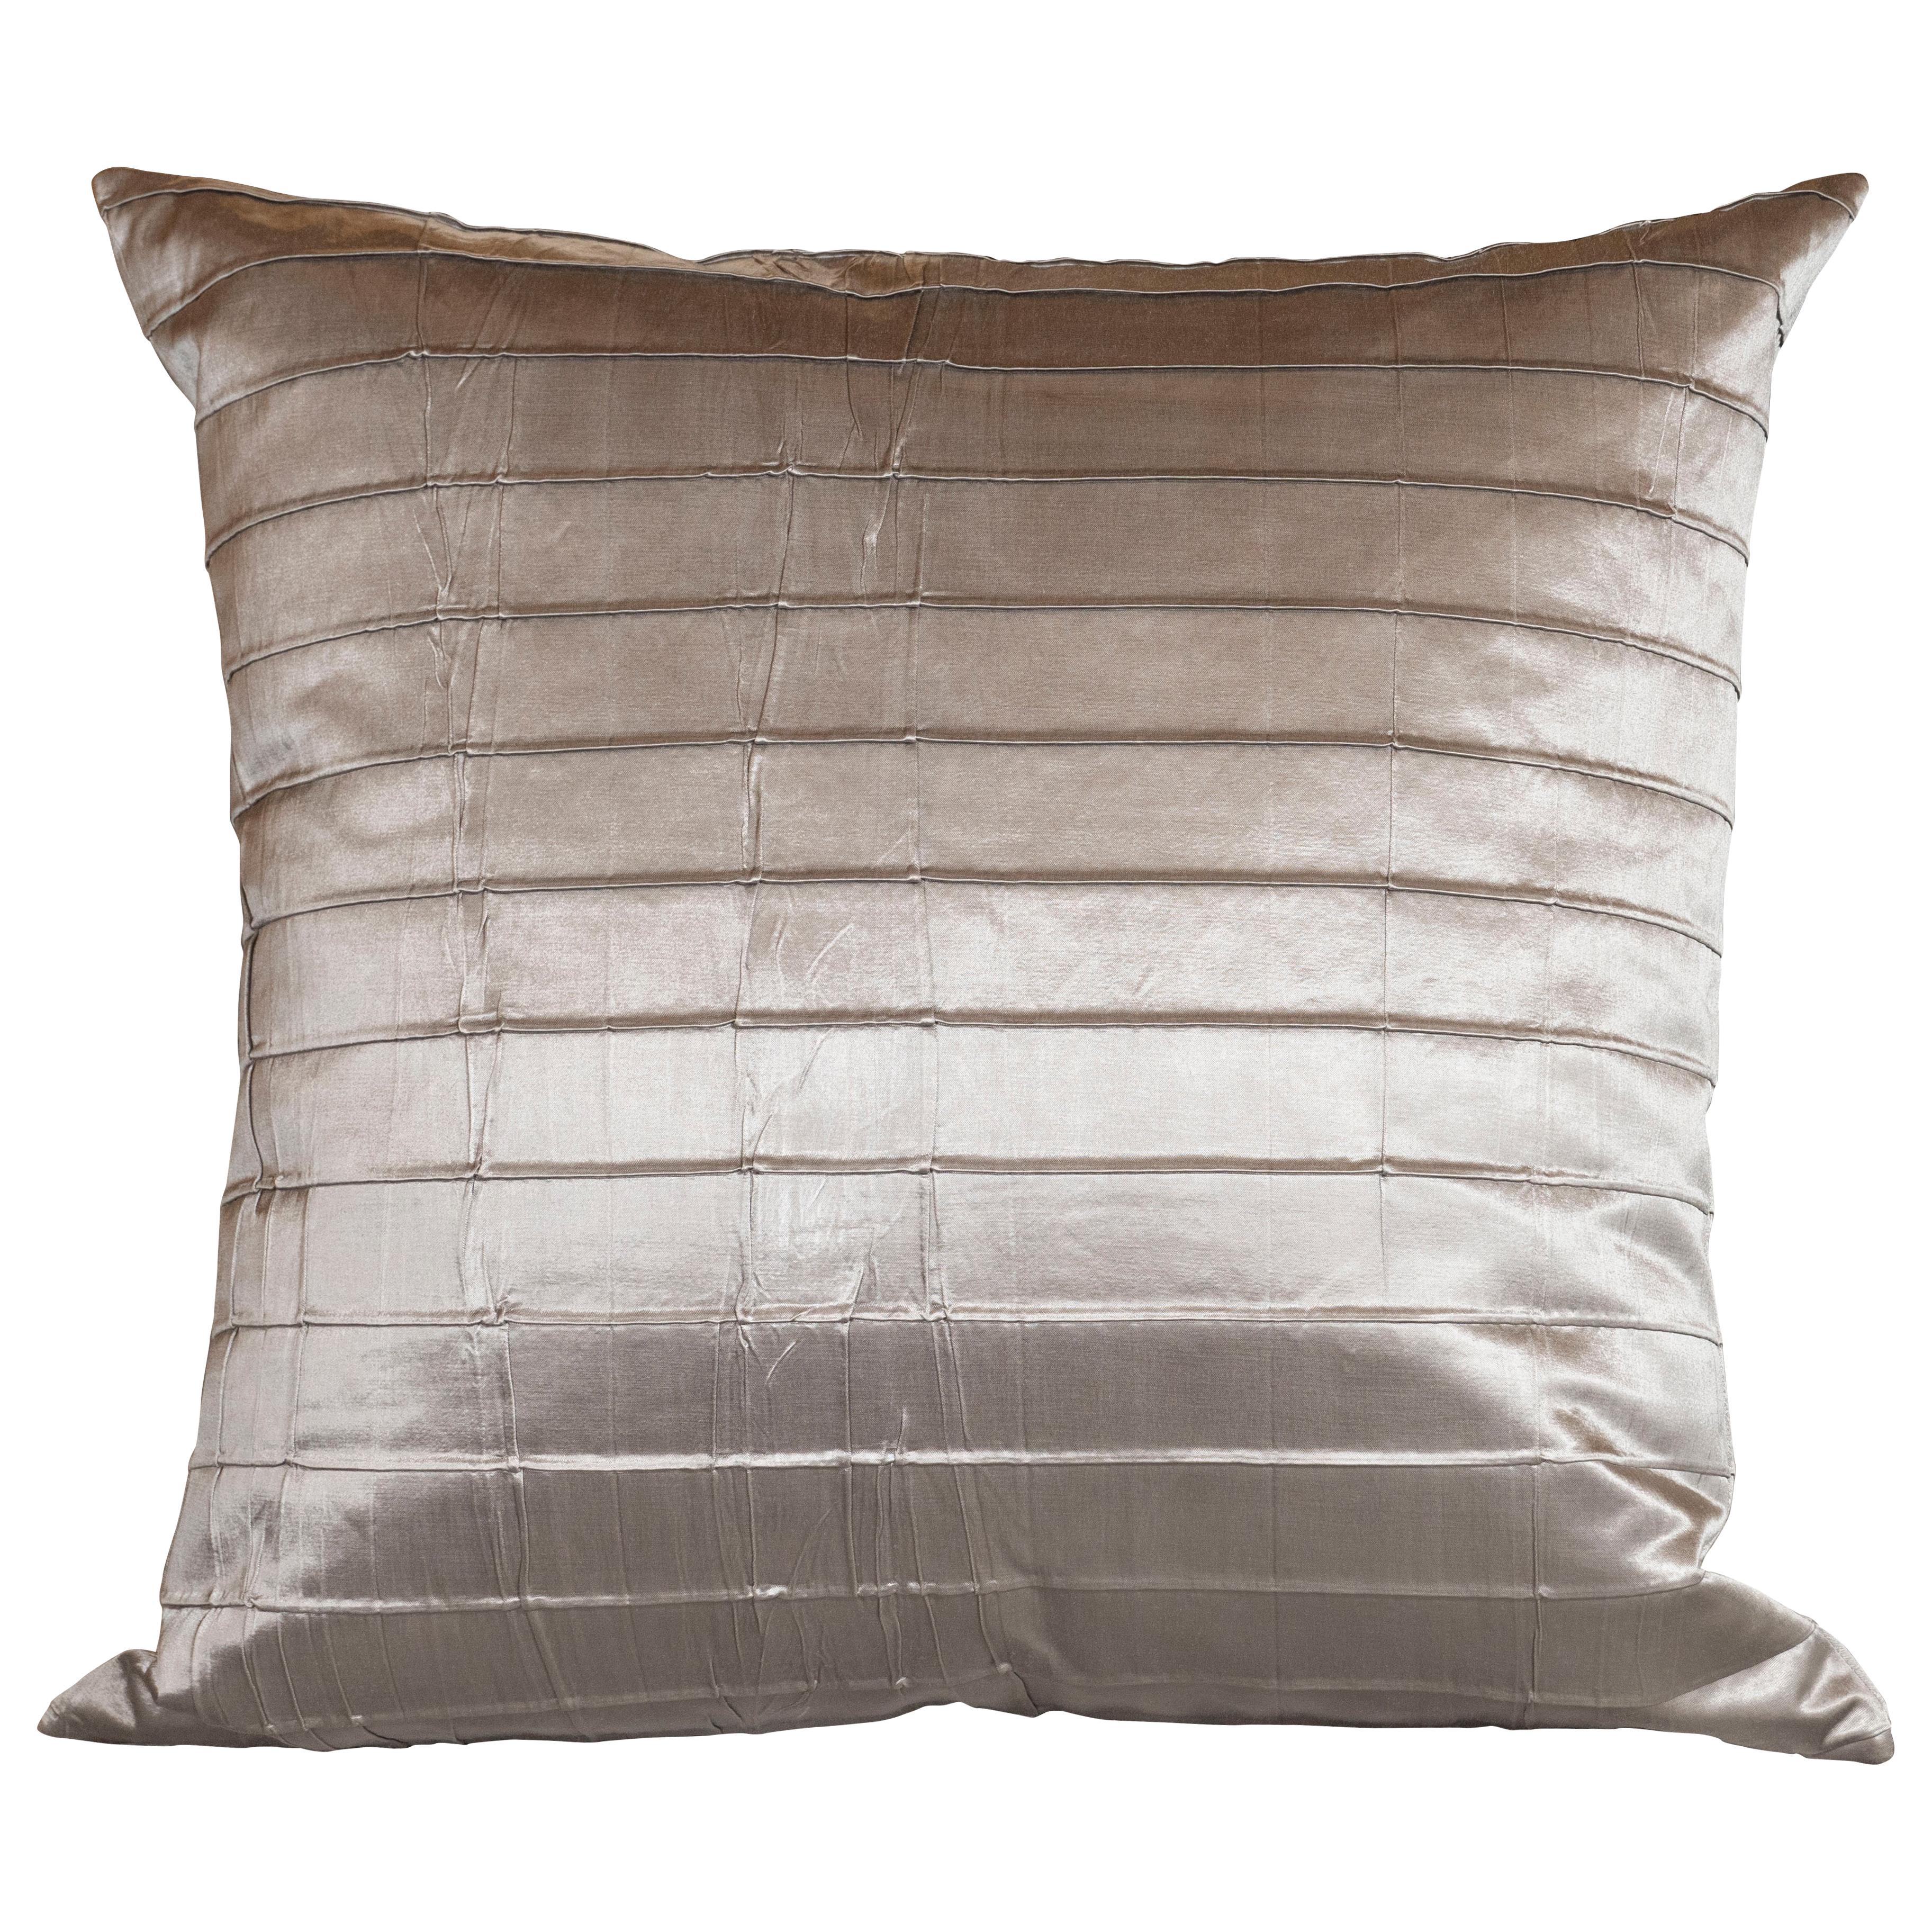 This gorgeous pair of pillows were newly fabricated in antique silver silk with a stunning sheen. They feature recurring striations throughout. With their monochromatic palate and austere pattern, they promise to add a touch of glamour to any